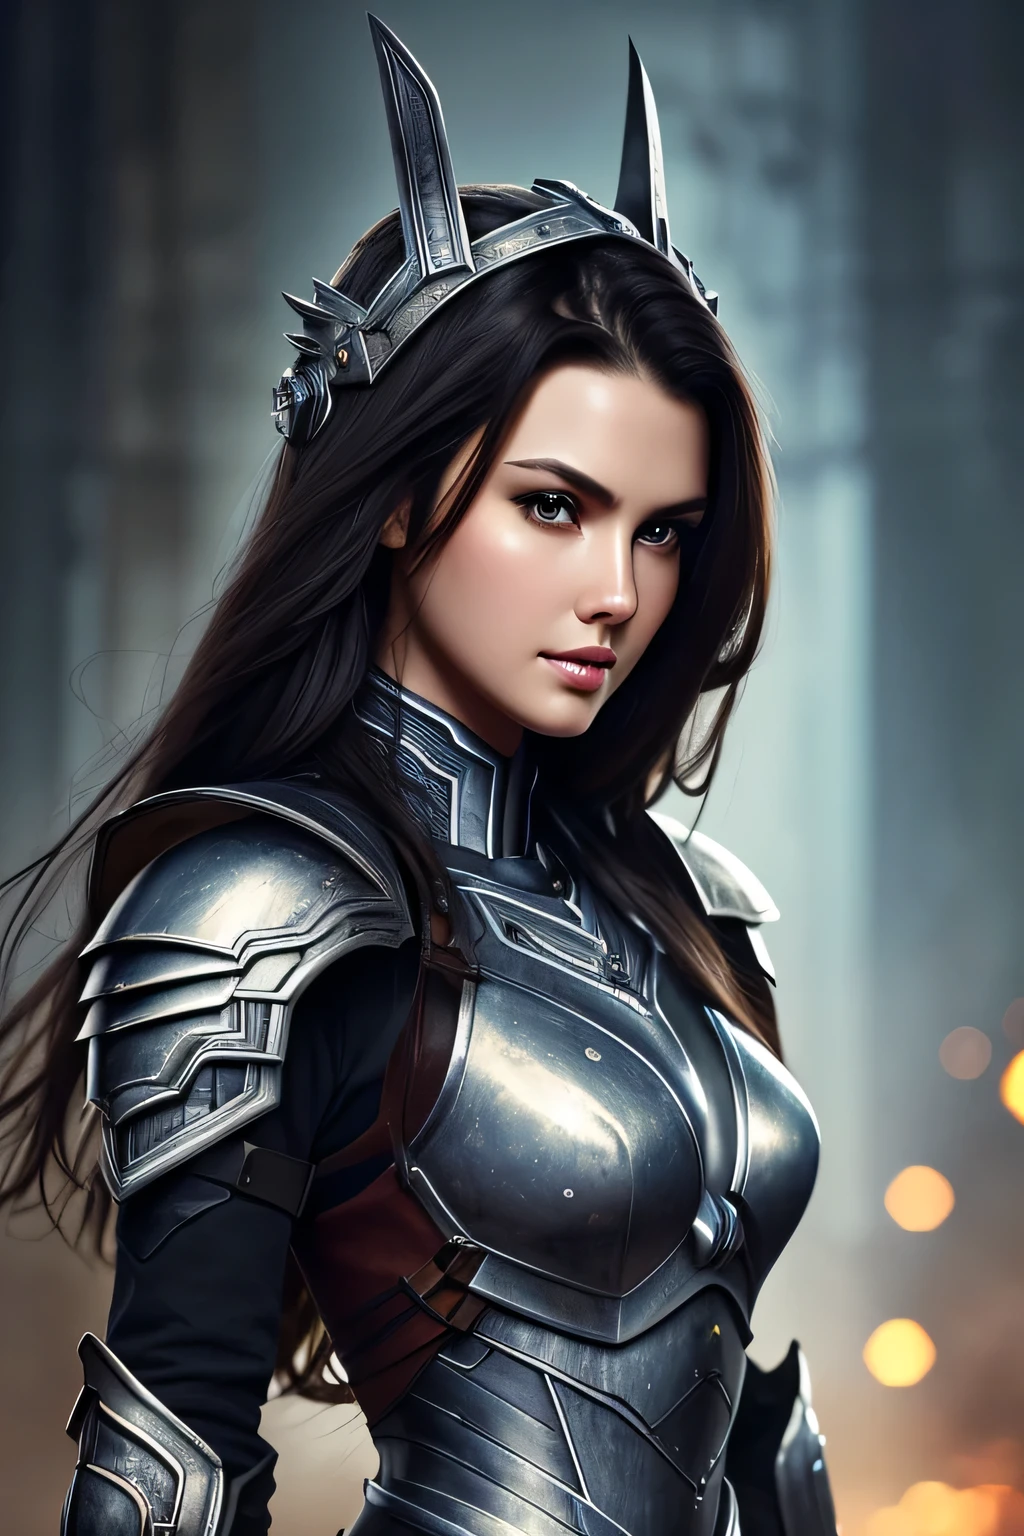 Tall beautiful woman with dark hair wearing highly realistic and detailed robotic armor, Upper body portrait、masterpiece, 最high quality, high quality, High resolution, Face close-up､
